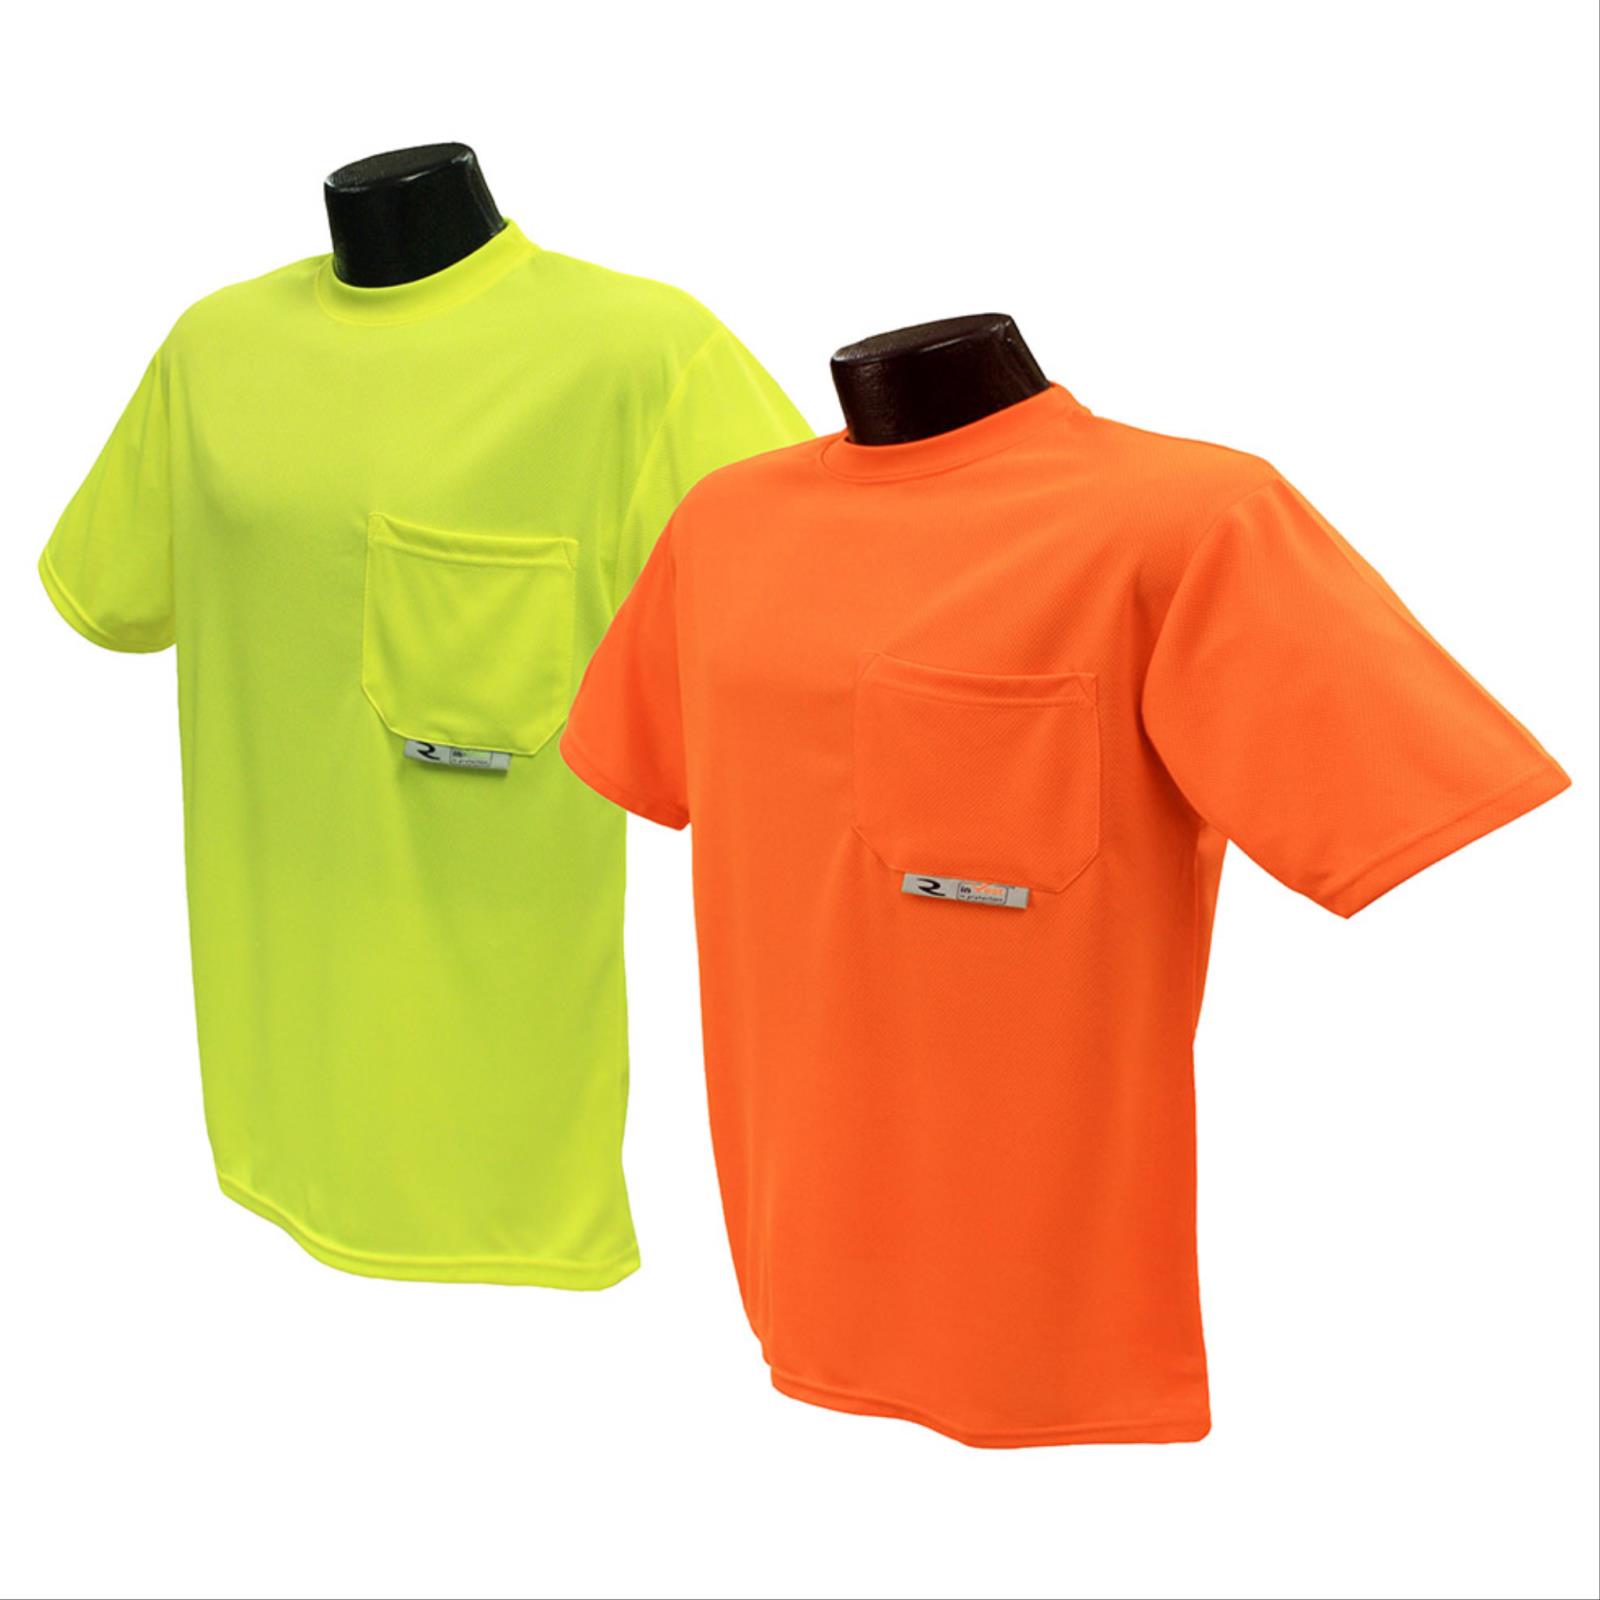 Radwear™ ST11-N Short Sleeve T-Shirt With MAX-DRI™, Non-Rated